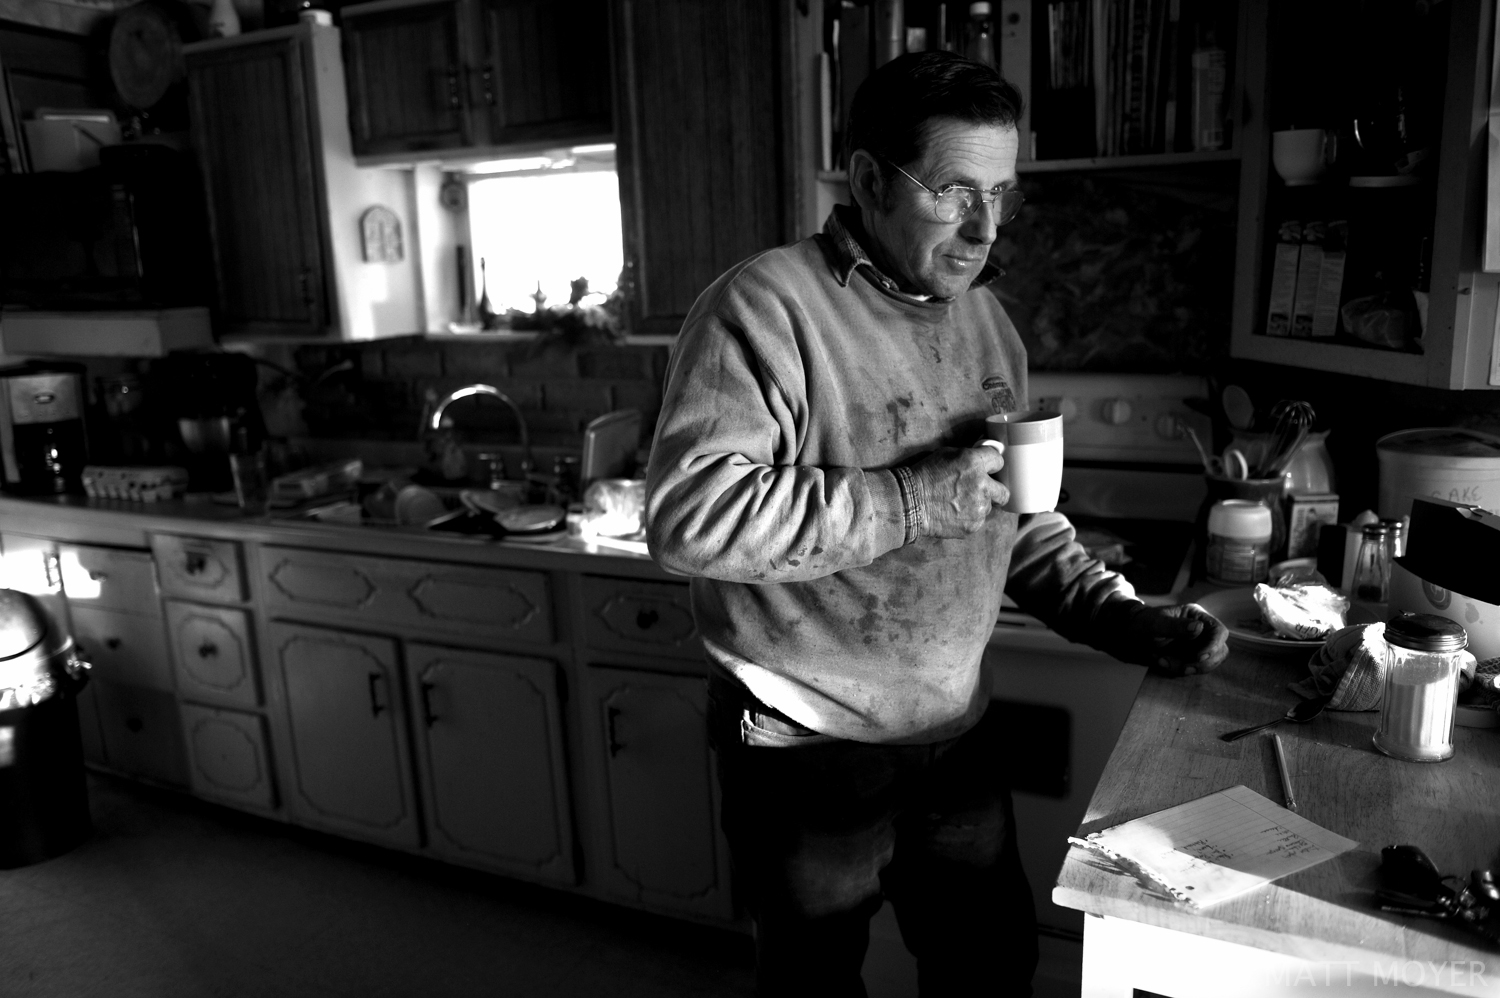  Joe Tidd drinks a cup of coffee in the kitchen of his farm house in Auburn, NY. Joe runs a small dairy farm in upstate New York. They have been hit hard by the recent drop in milk prices. They recently had to get rid of their health insurance becaus